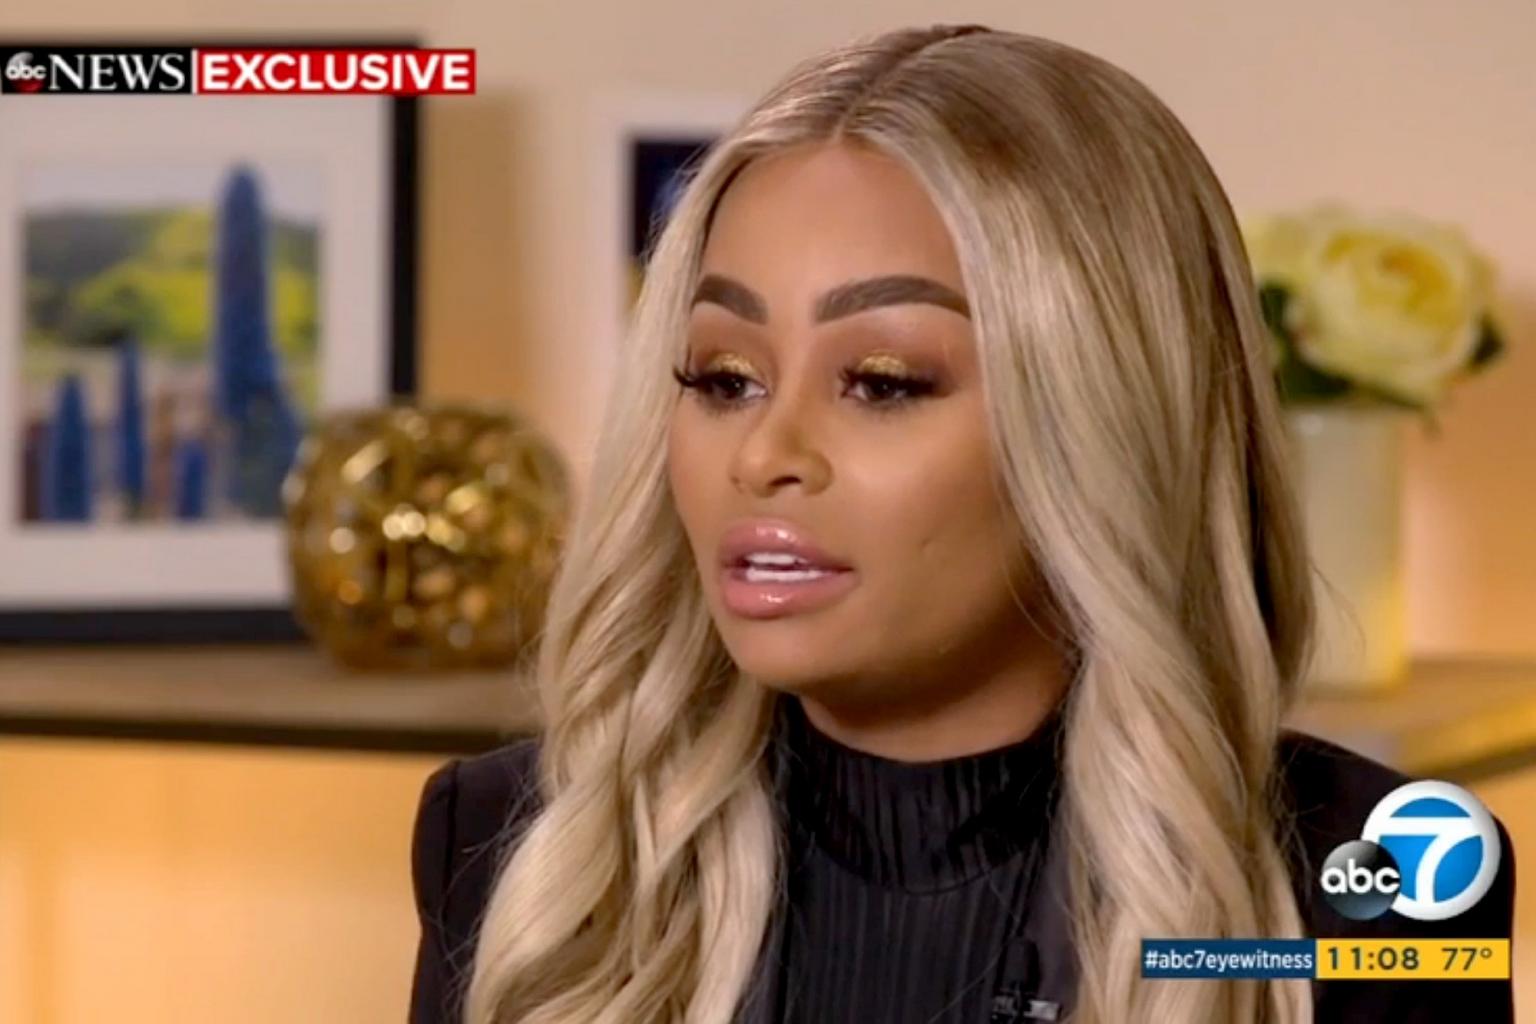 Blac Chyna Is â€˜Devastatedâ€™ After Ex Rob Kardashian Posted Naked Pictures of Her onÂ Instagram